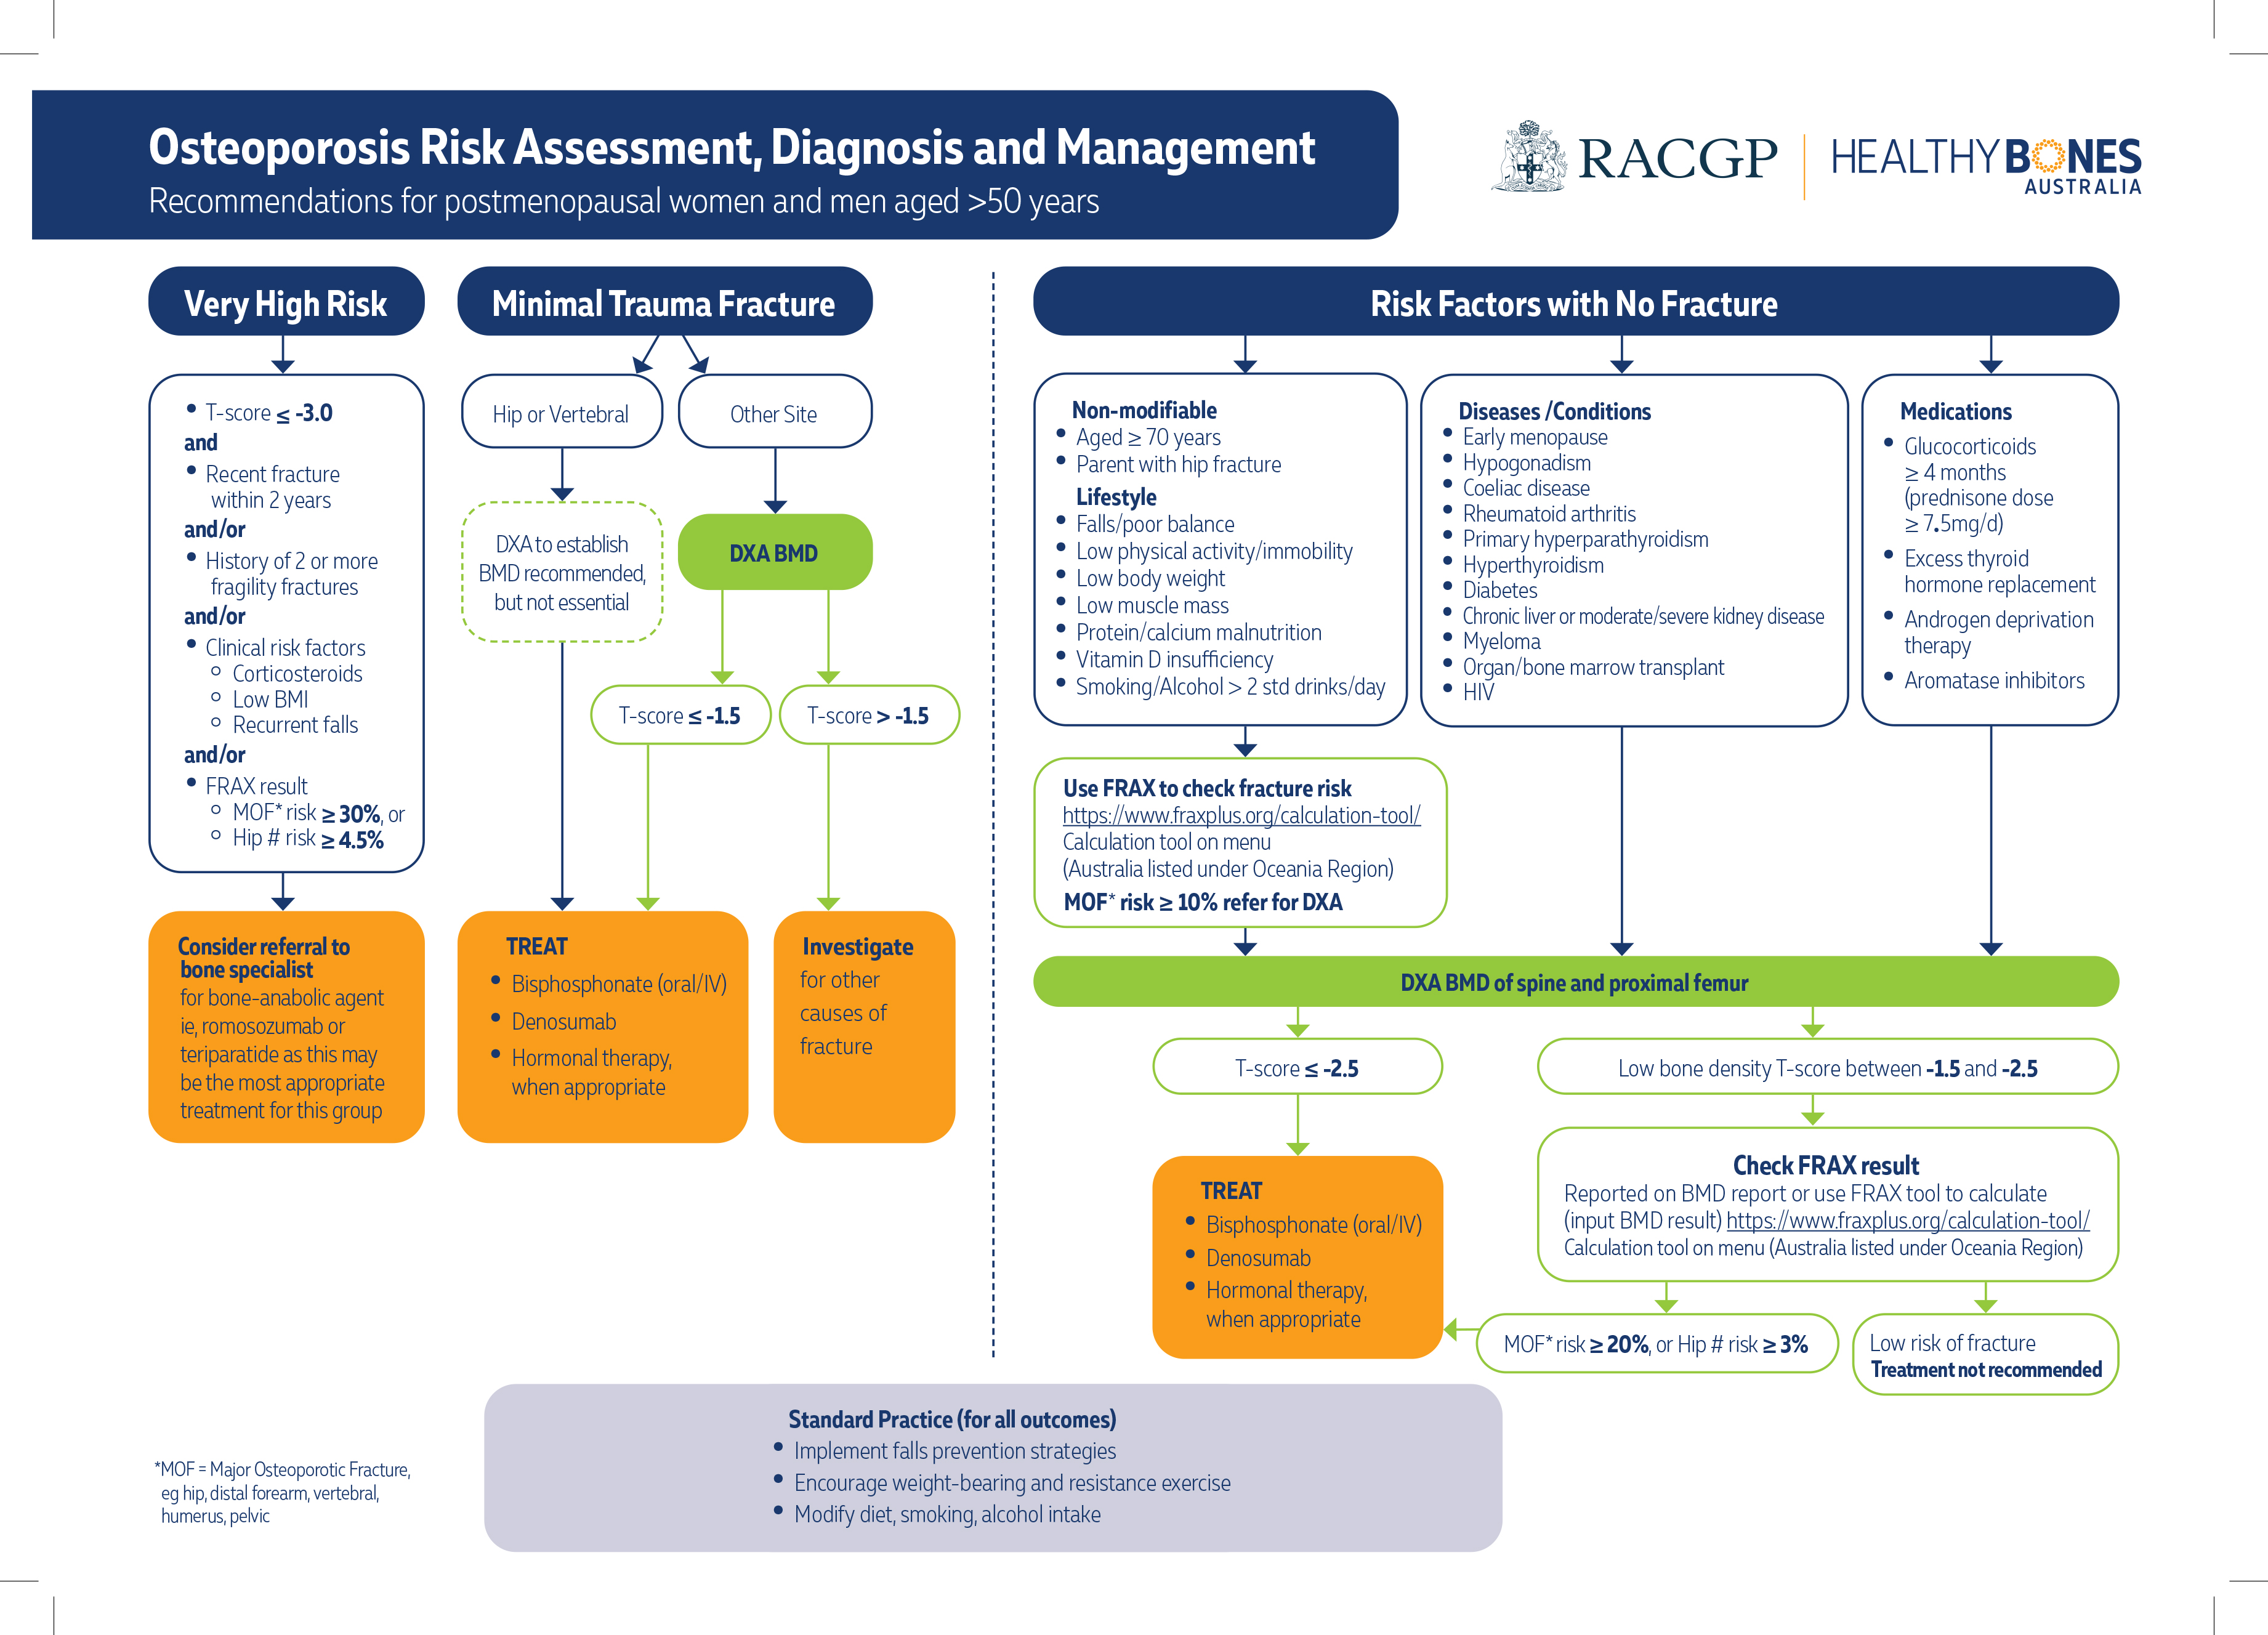 Osteoporosis risk assessment, diagnosis and management flow chart